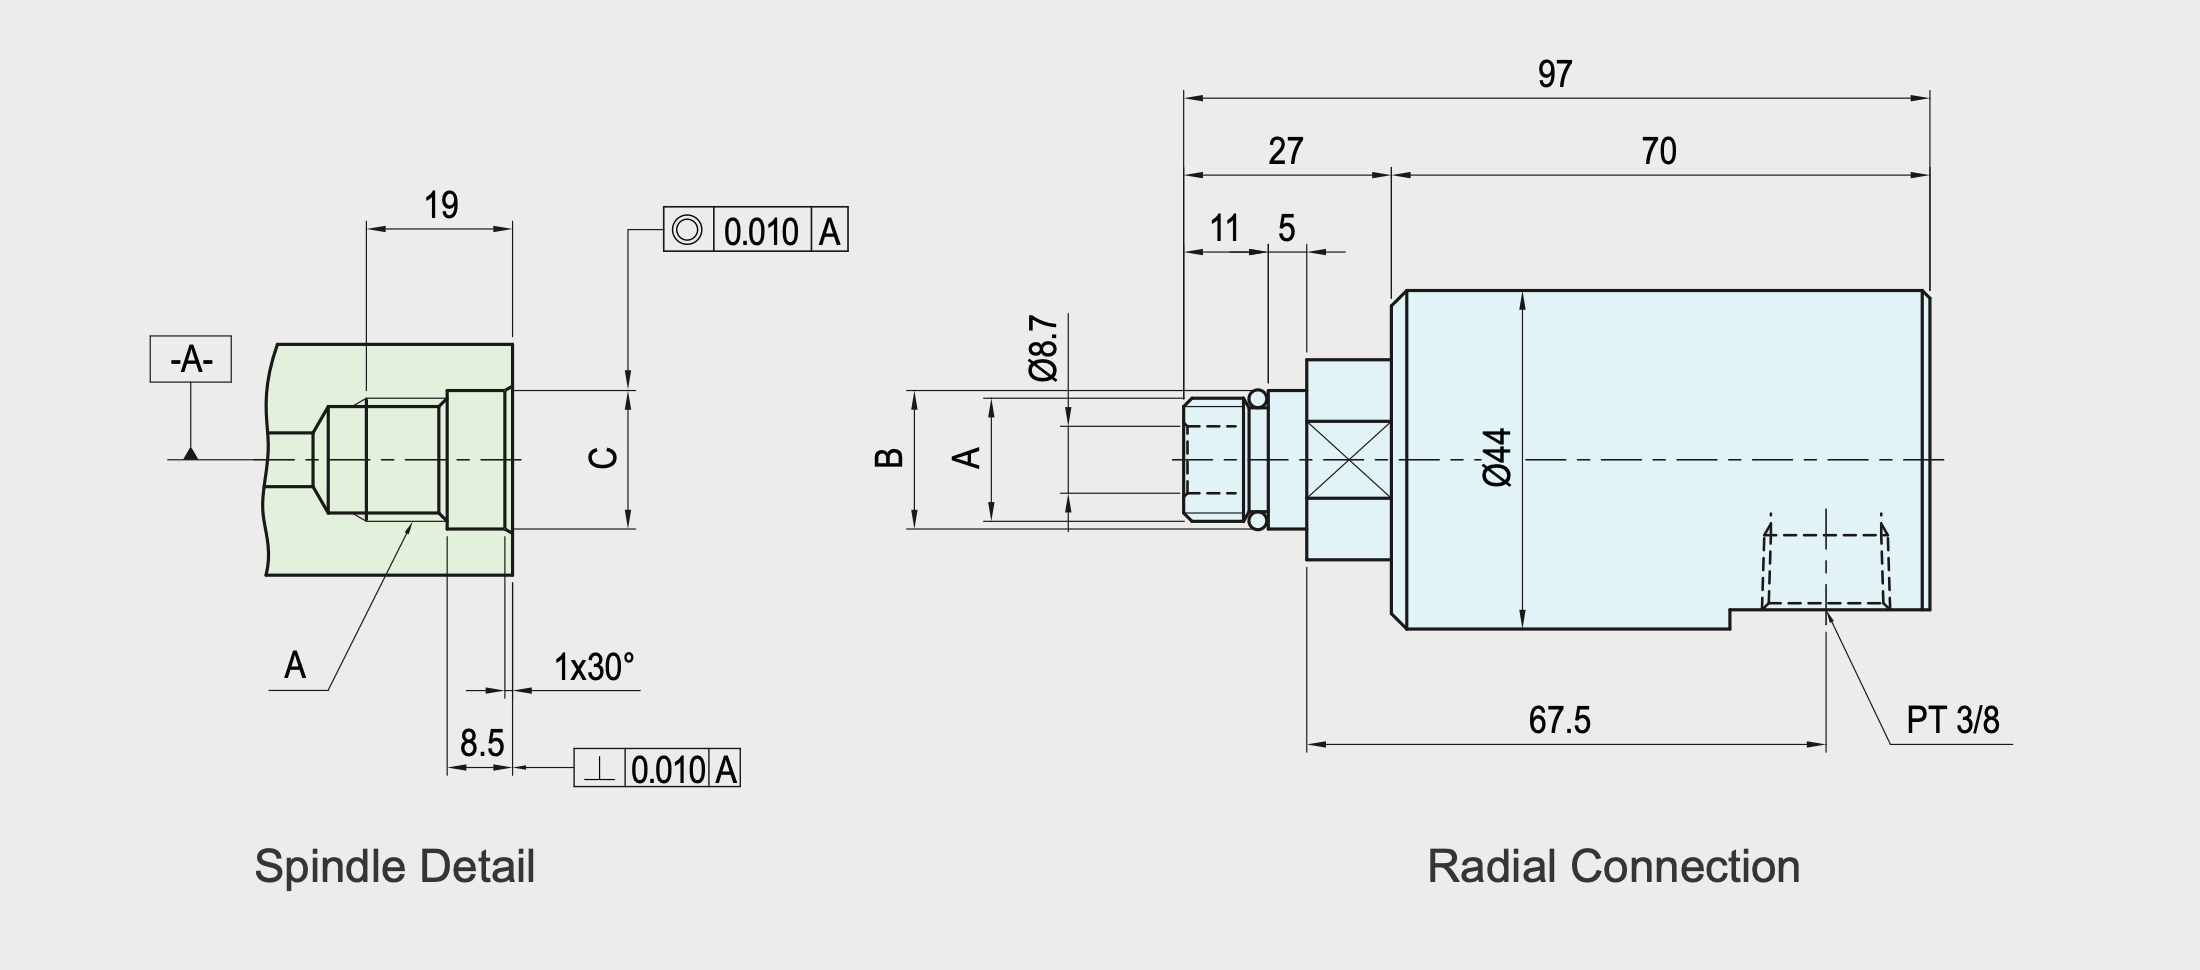 SRJ01-101-01 Technical Drawing Integrated type Rotary Union-Rotary Joint for CNC Lathe chucks in-the-shaft mounted design